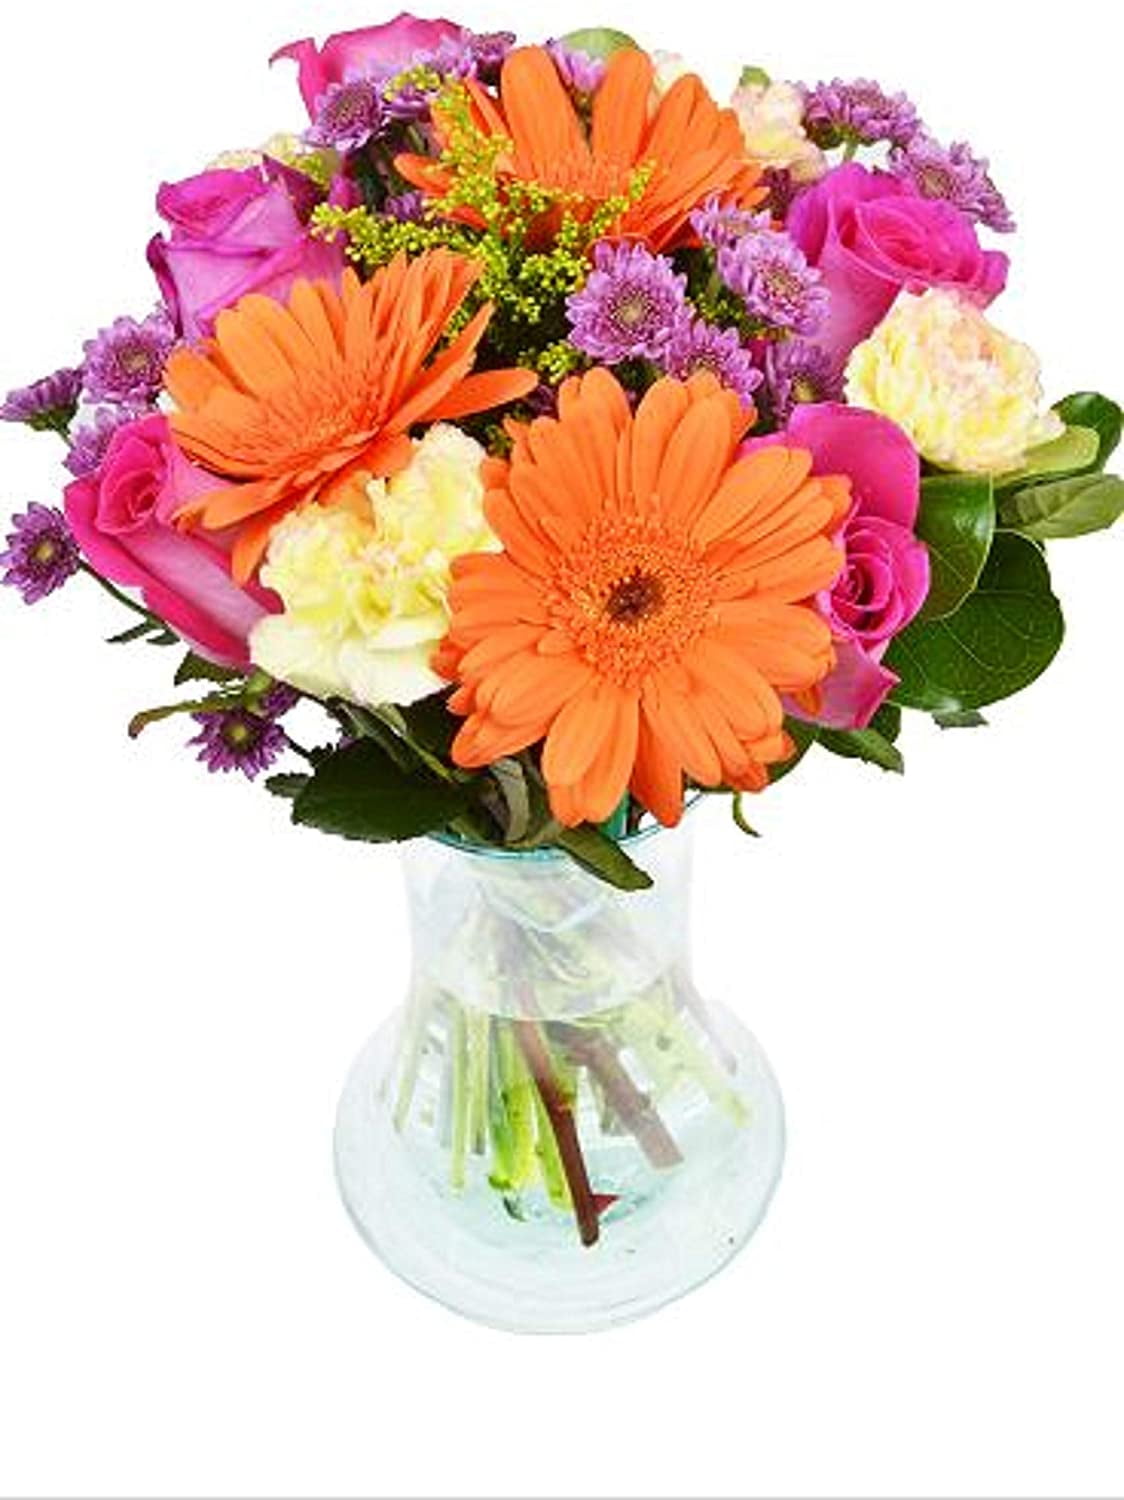 Arabella Fields of World Bouquet of Fresh Cut Flowers with a Free Glass Vase